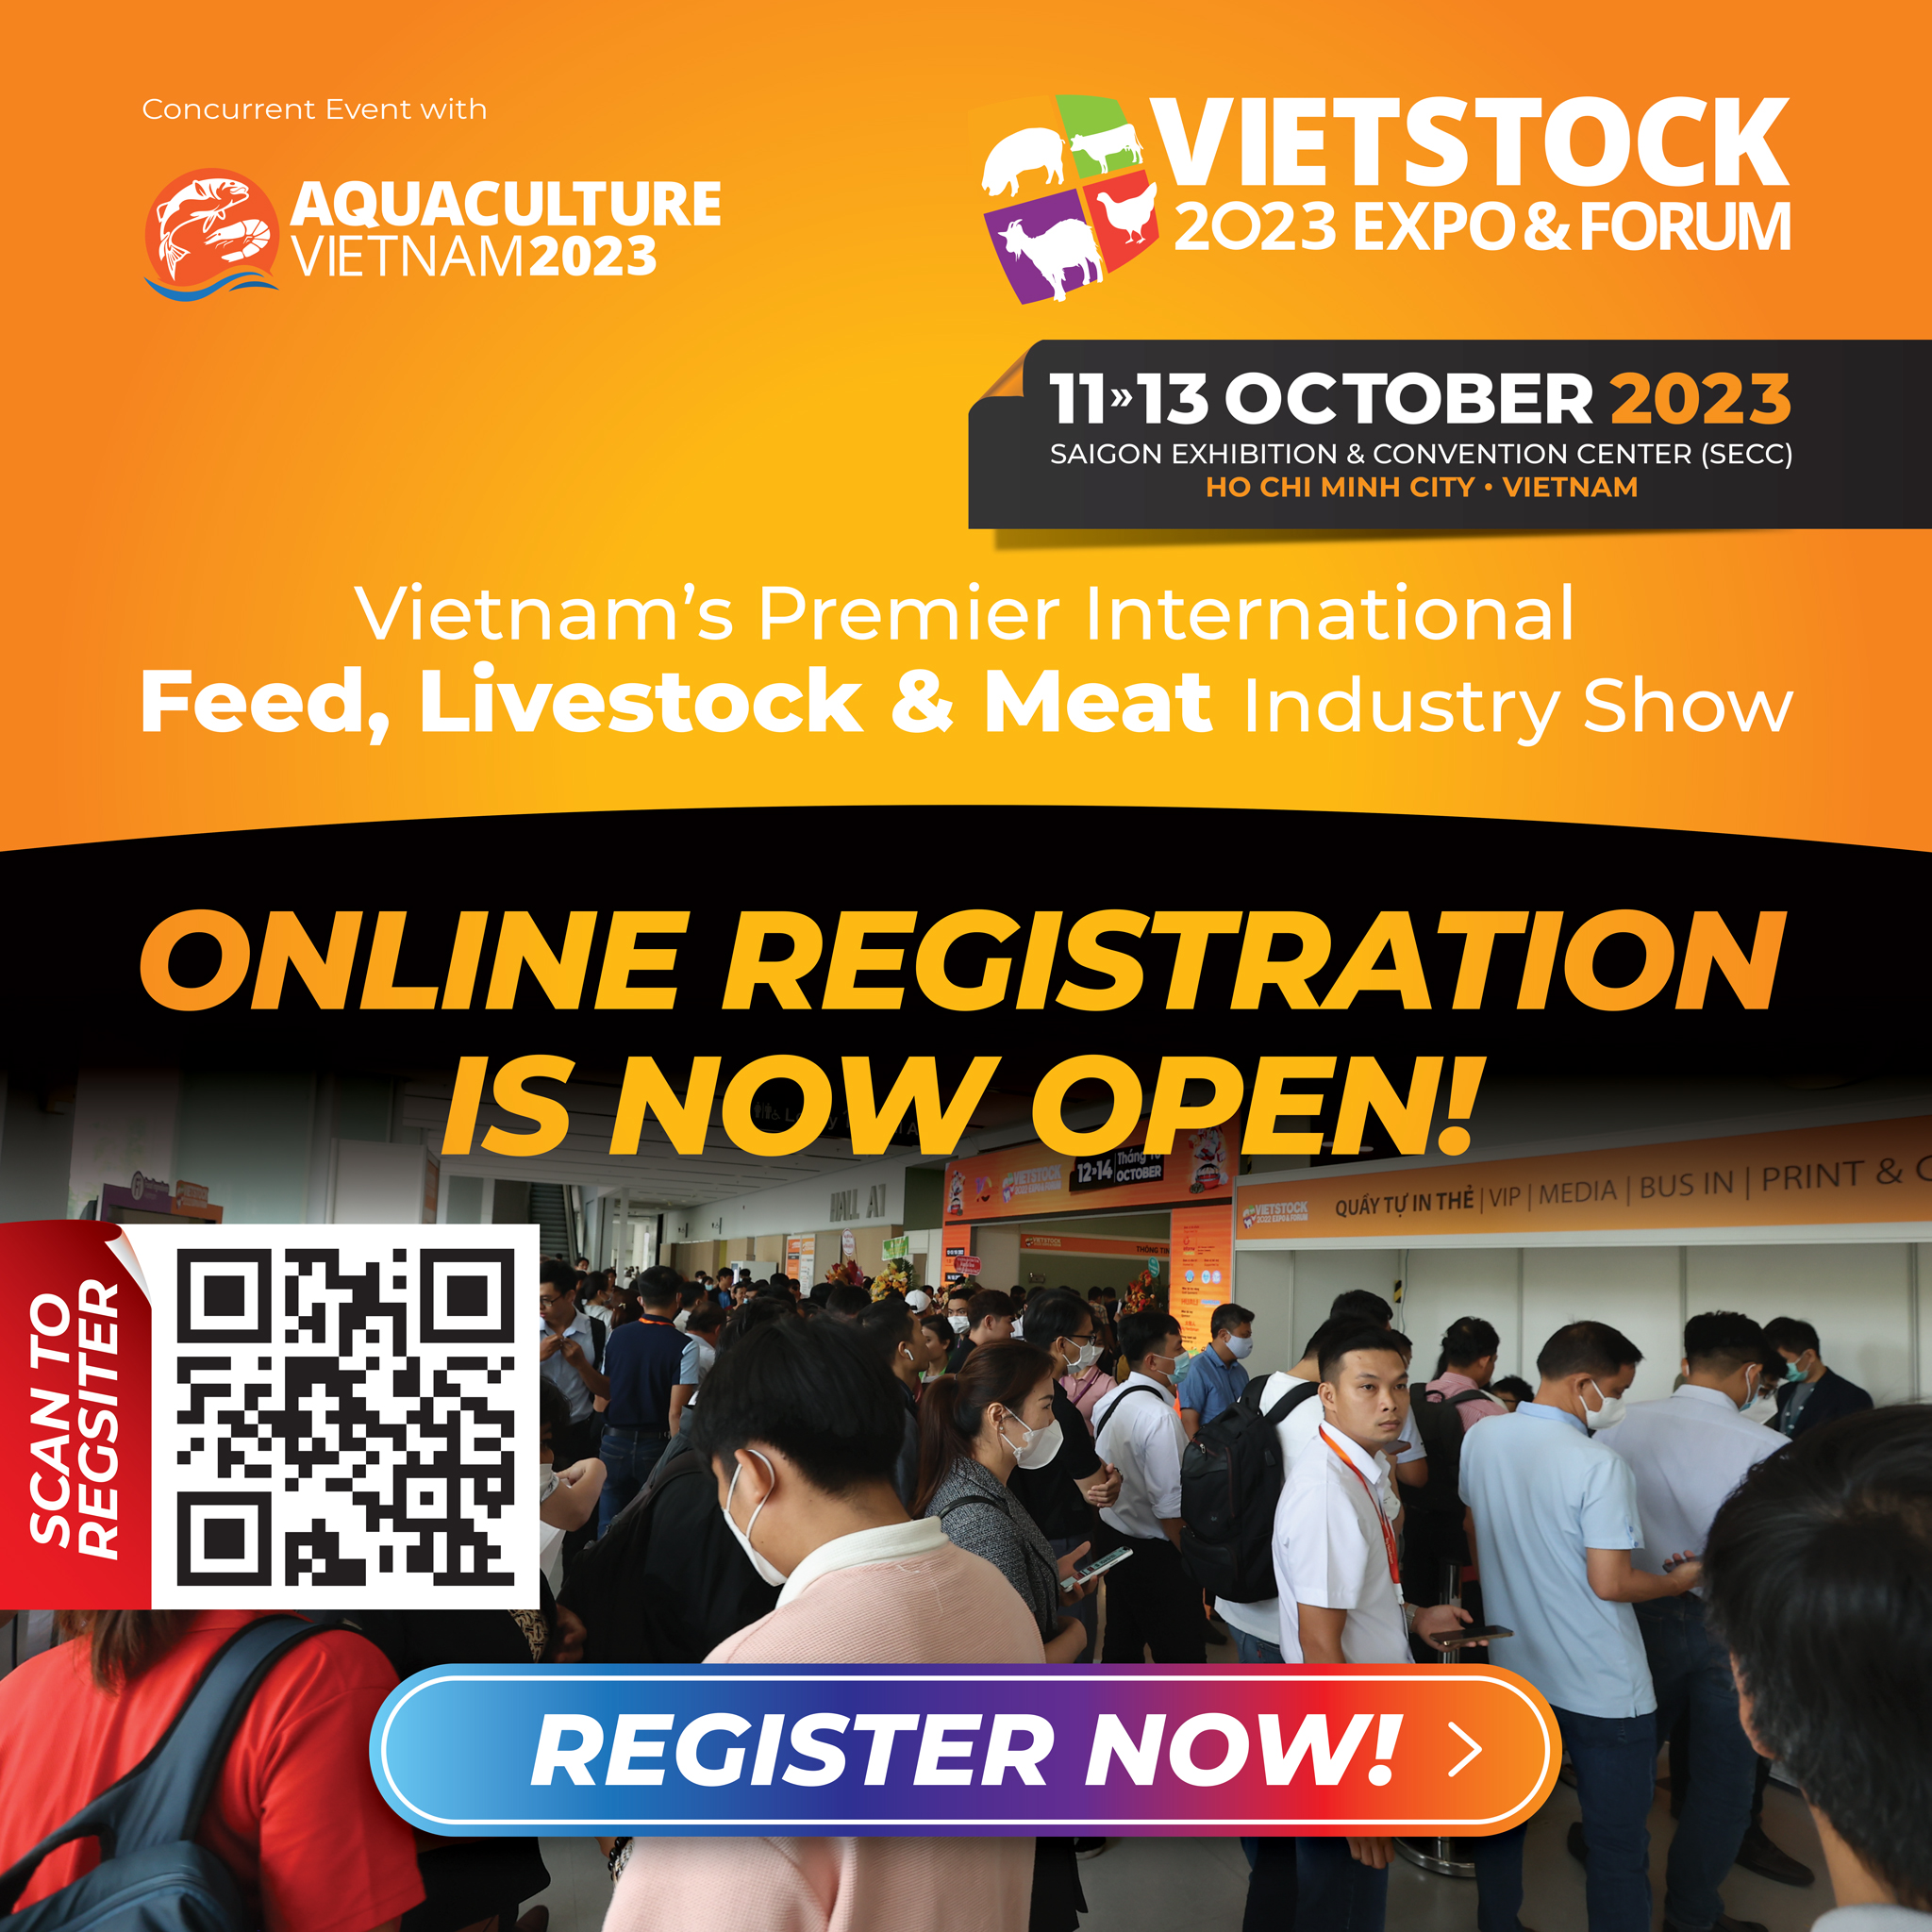 VIETSTOCK 2023 is The Premier International Feed, Livestock & Meat Industry show in Vietnam. The exhibition officially opened for registration on May 18, 2023.